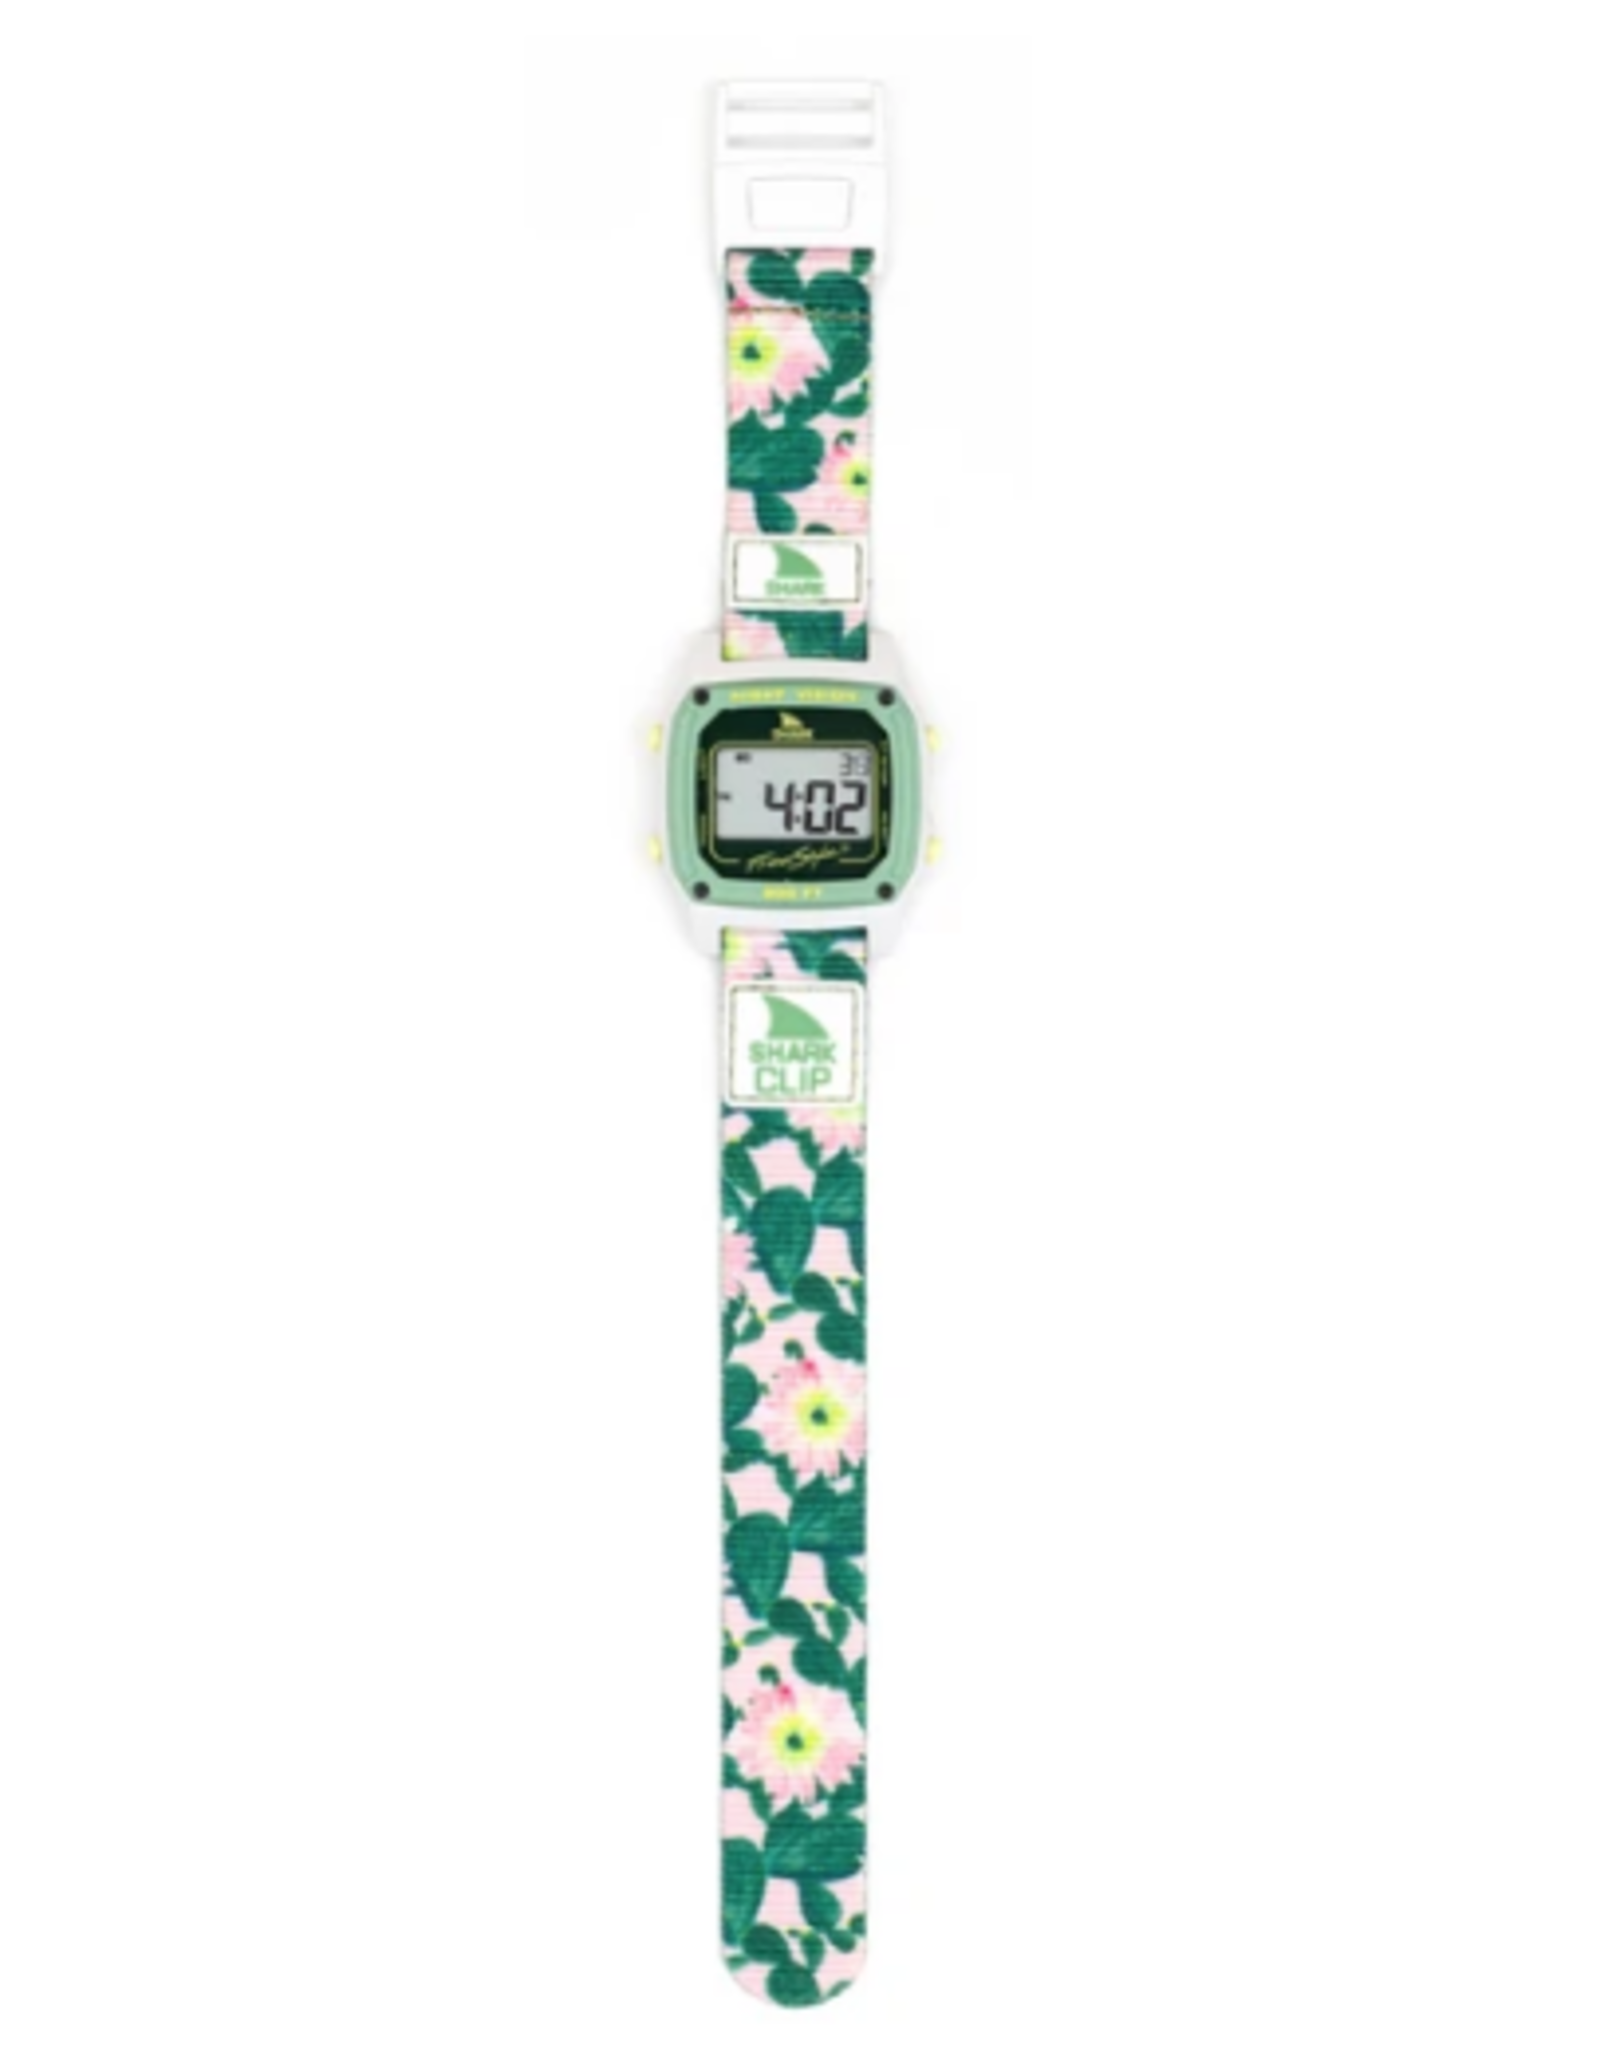 FREESTYLE FREESTYLE SHARK CLASSIC CLIP PRICKLY PEAR GREEN WATCH